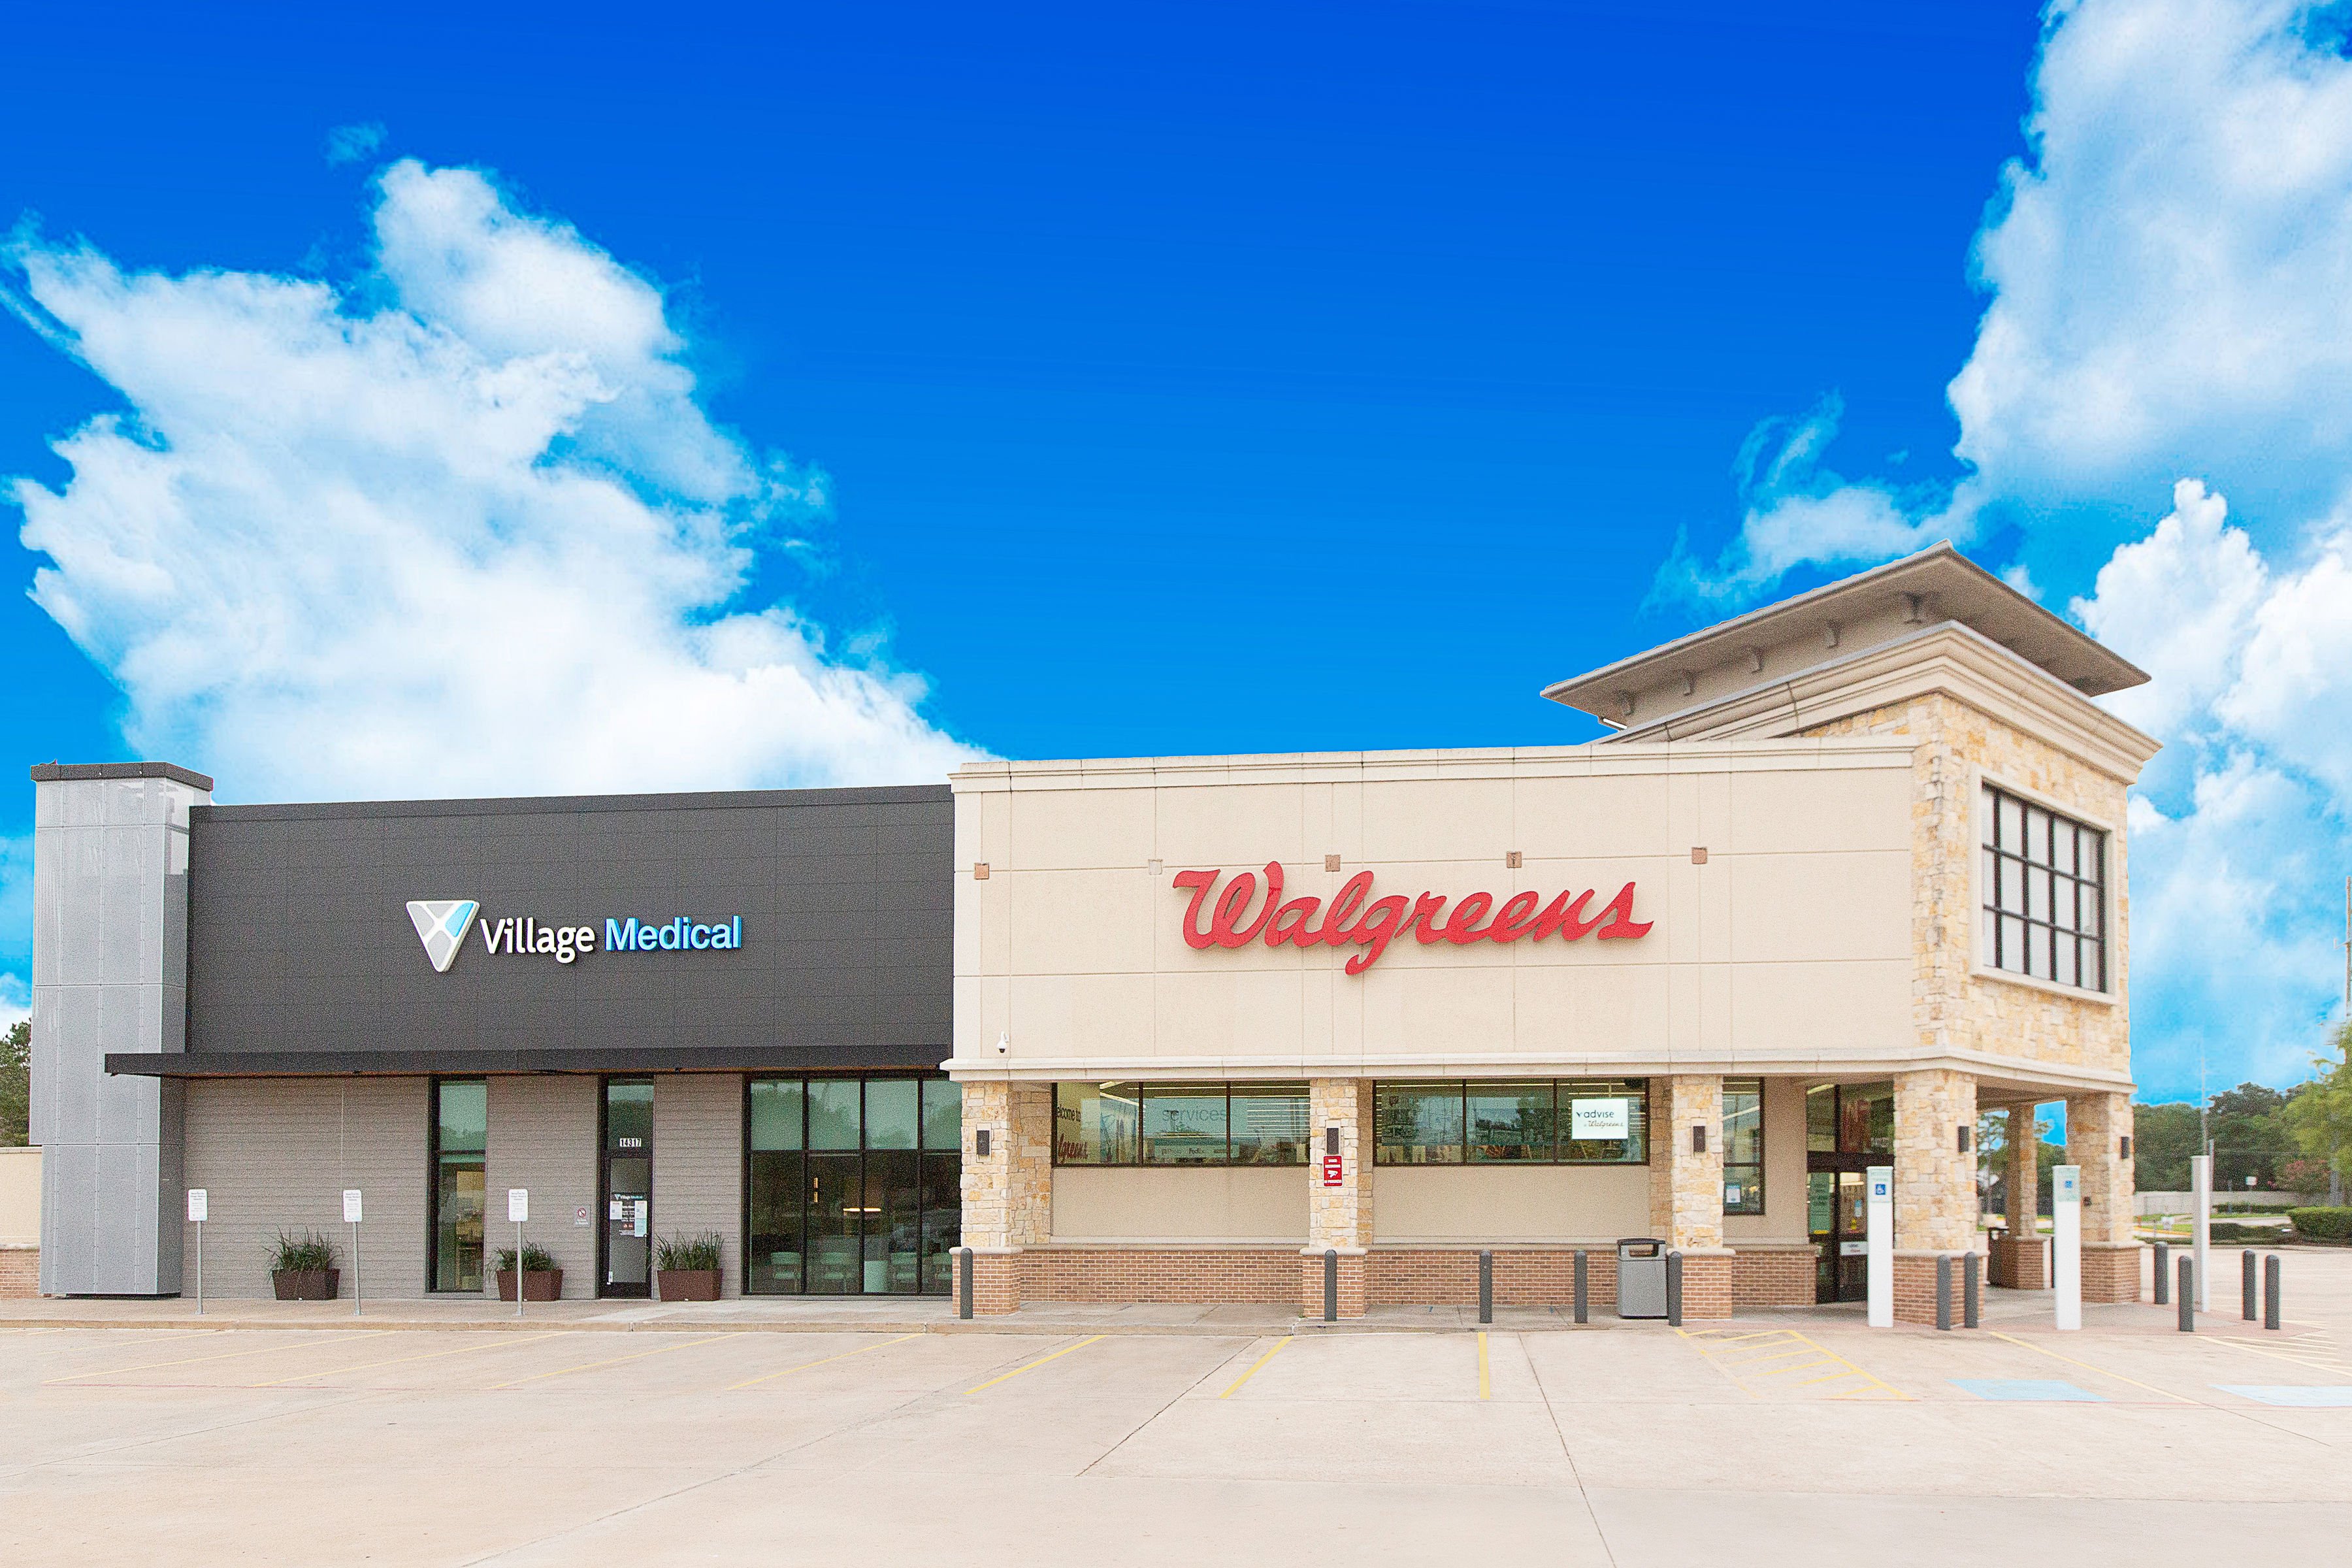 Walgreens' VillageMD inks $9B deal to buy Summit Health, marking largest physician deal of the year